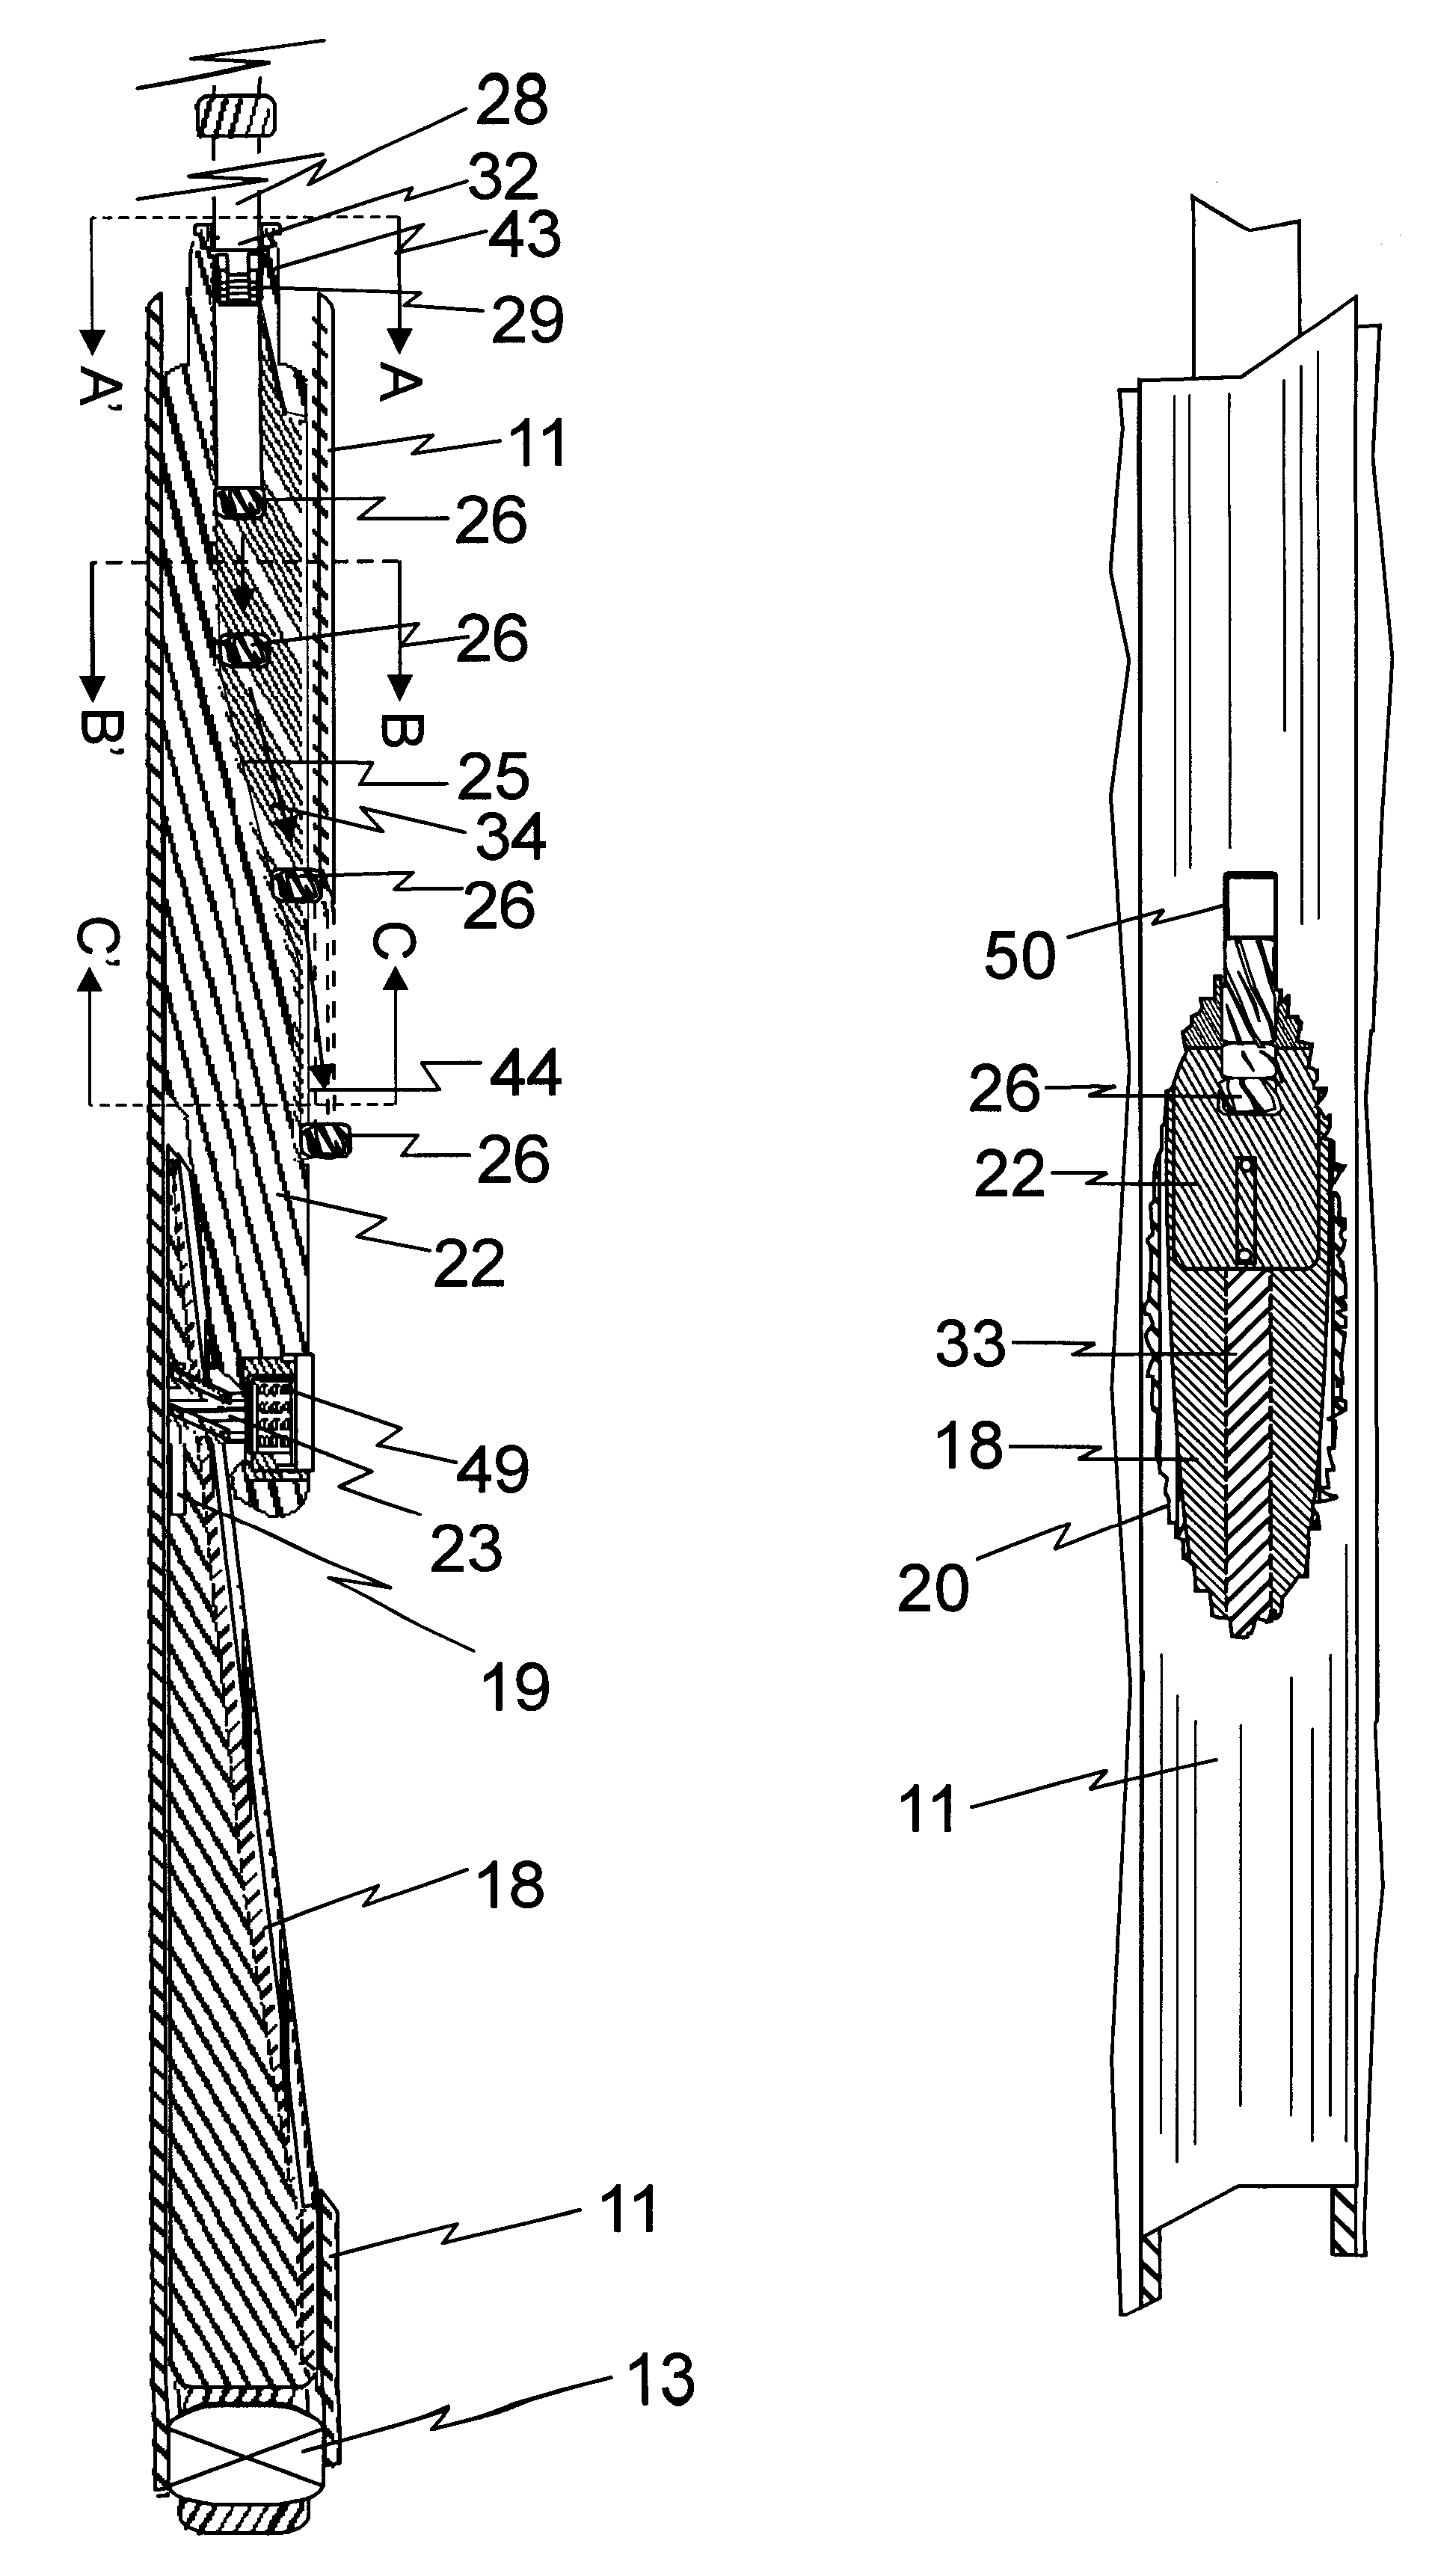 Down hole assembly and method for forming a down hole window and at least one keyway in communication with the down hole window for use in multilateral wells